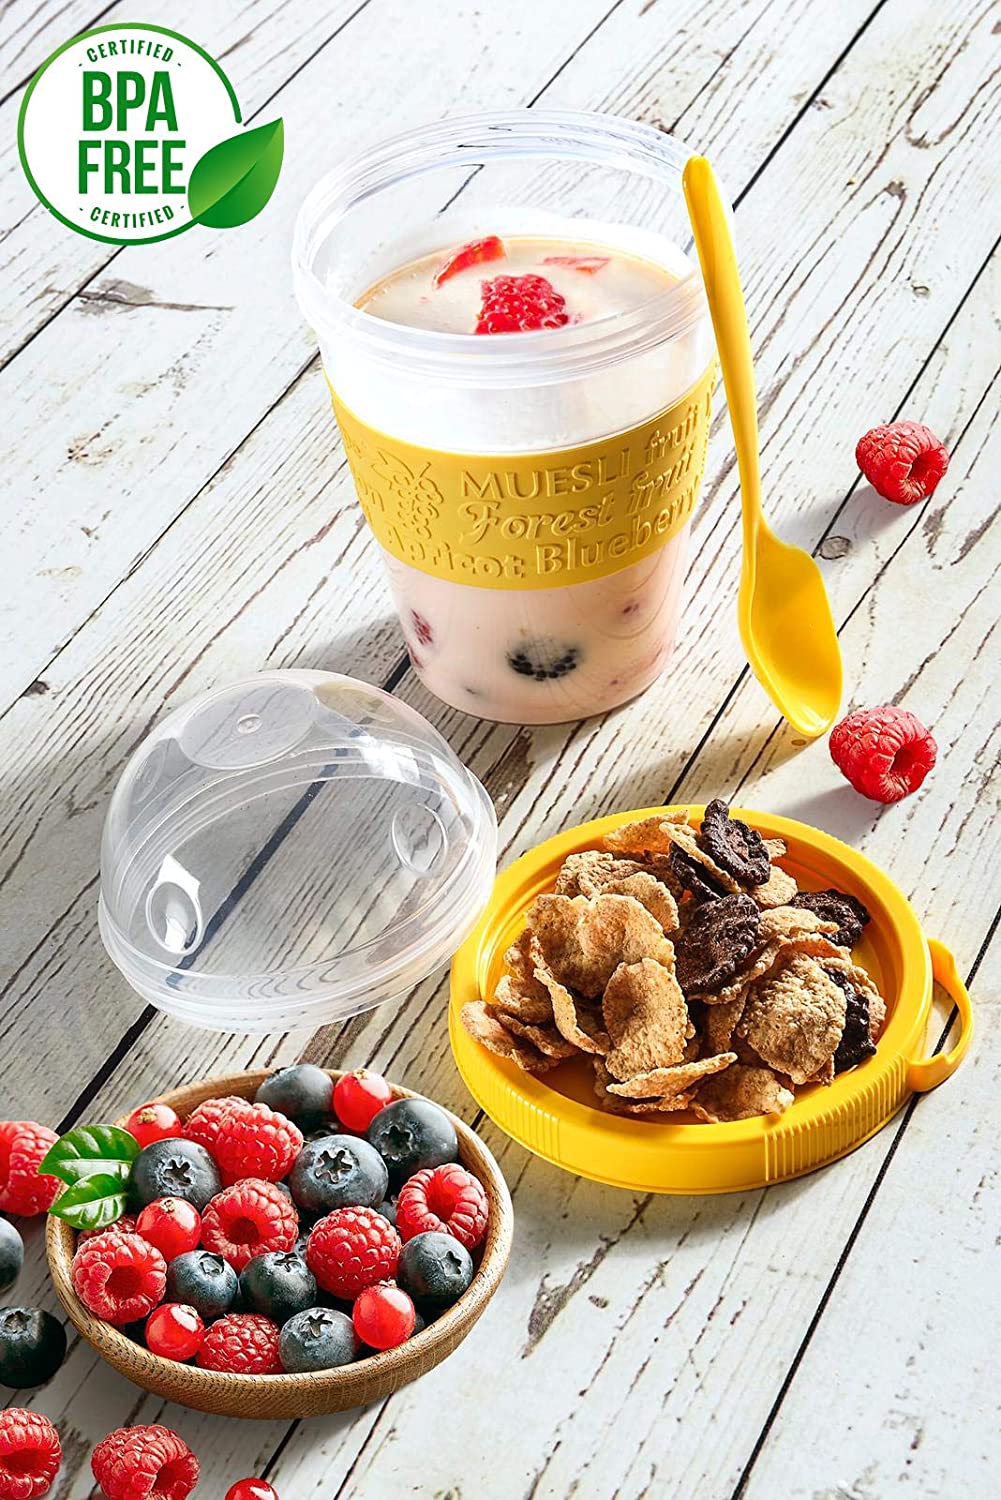 Oatmeal container portable cereal cup | Yogurt containers with lids with  spoon | Airtight travel cereal bowl and milk container